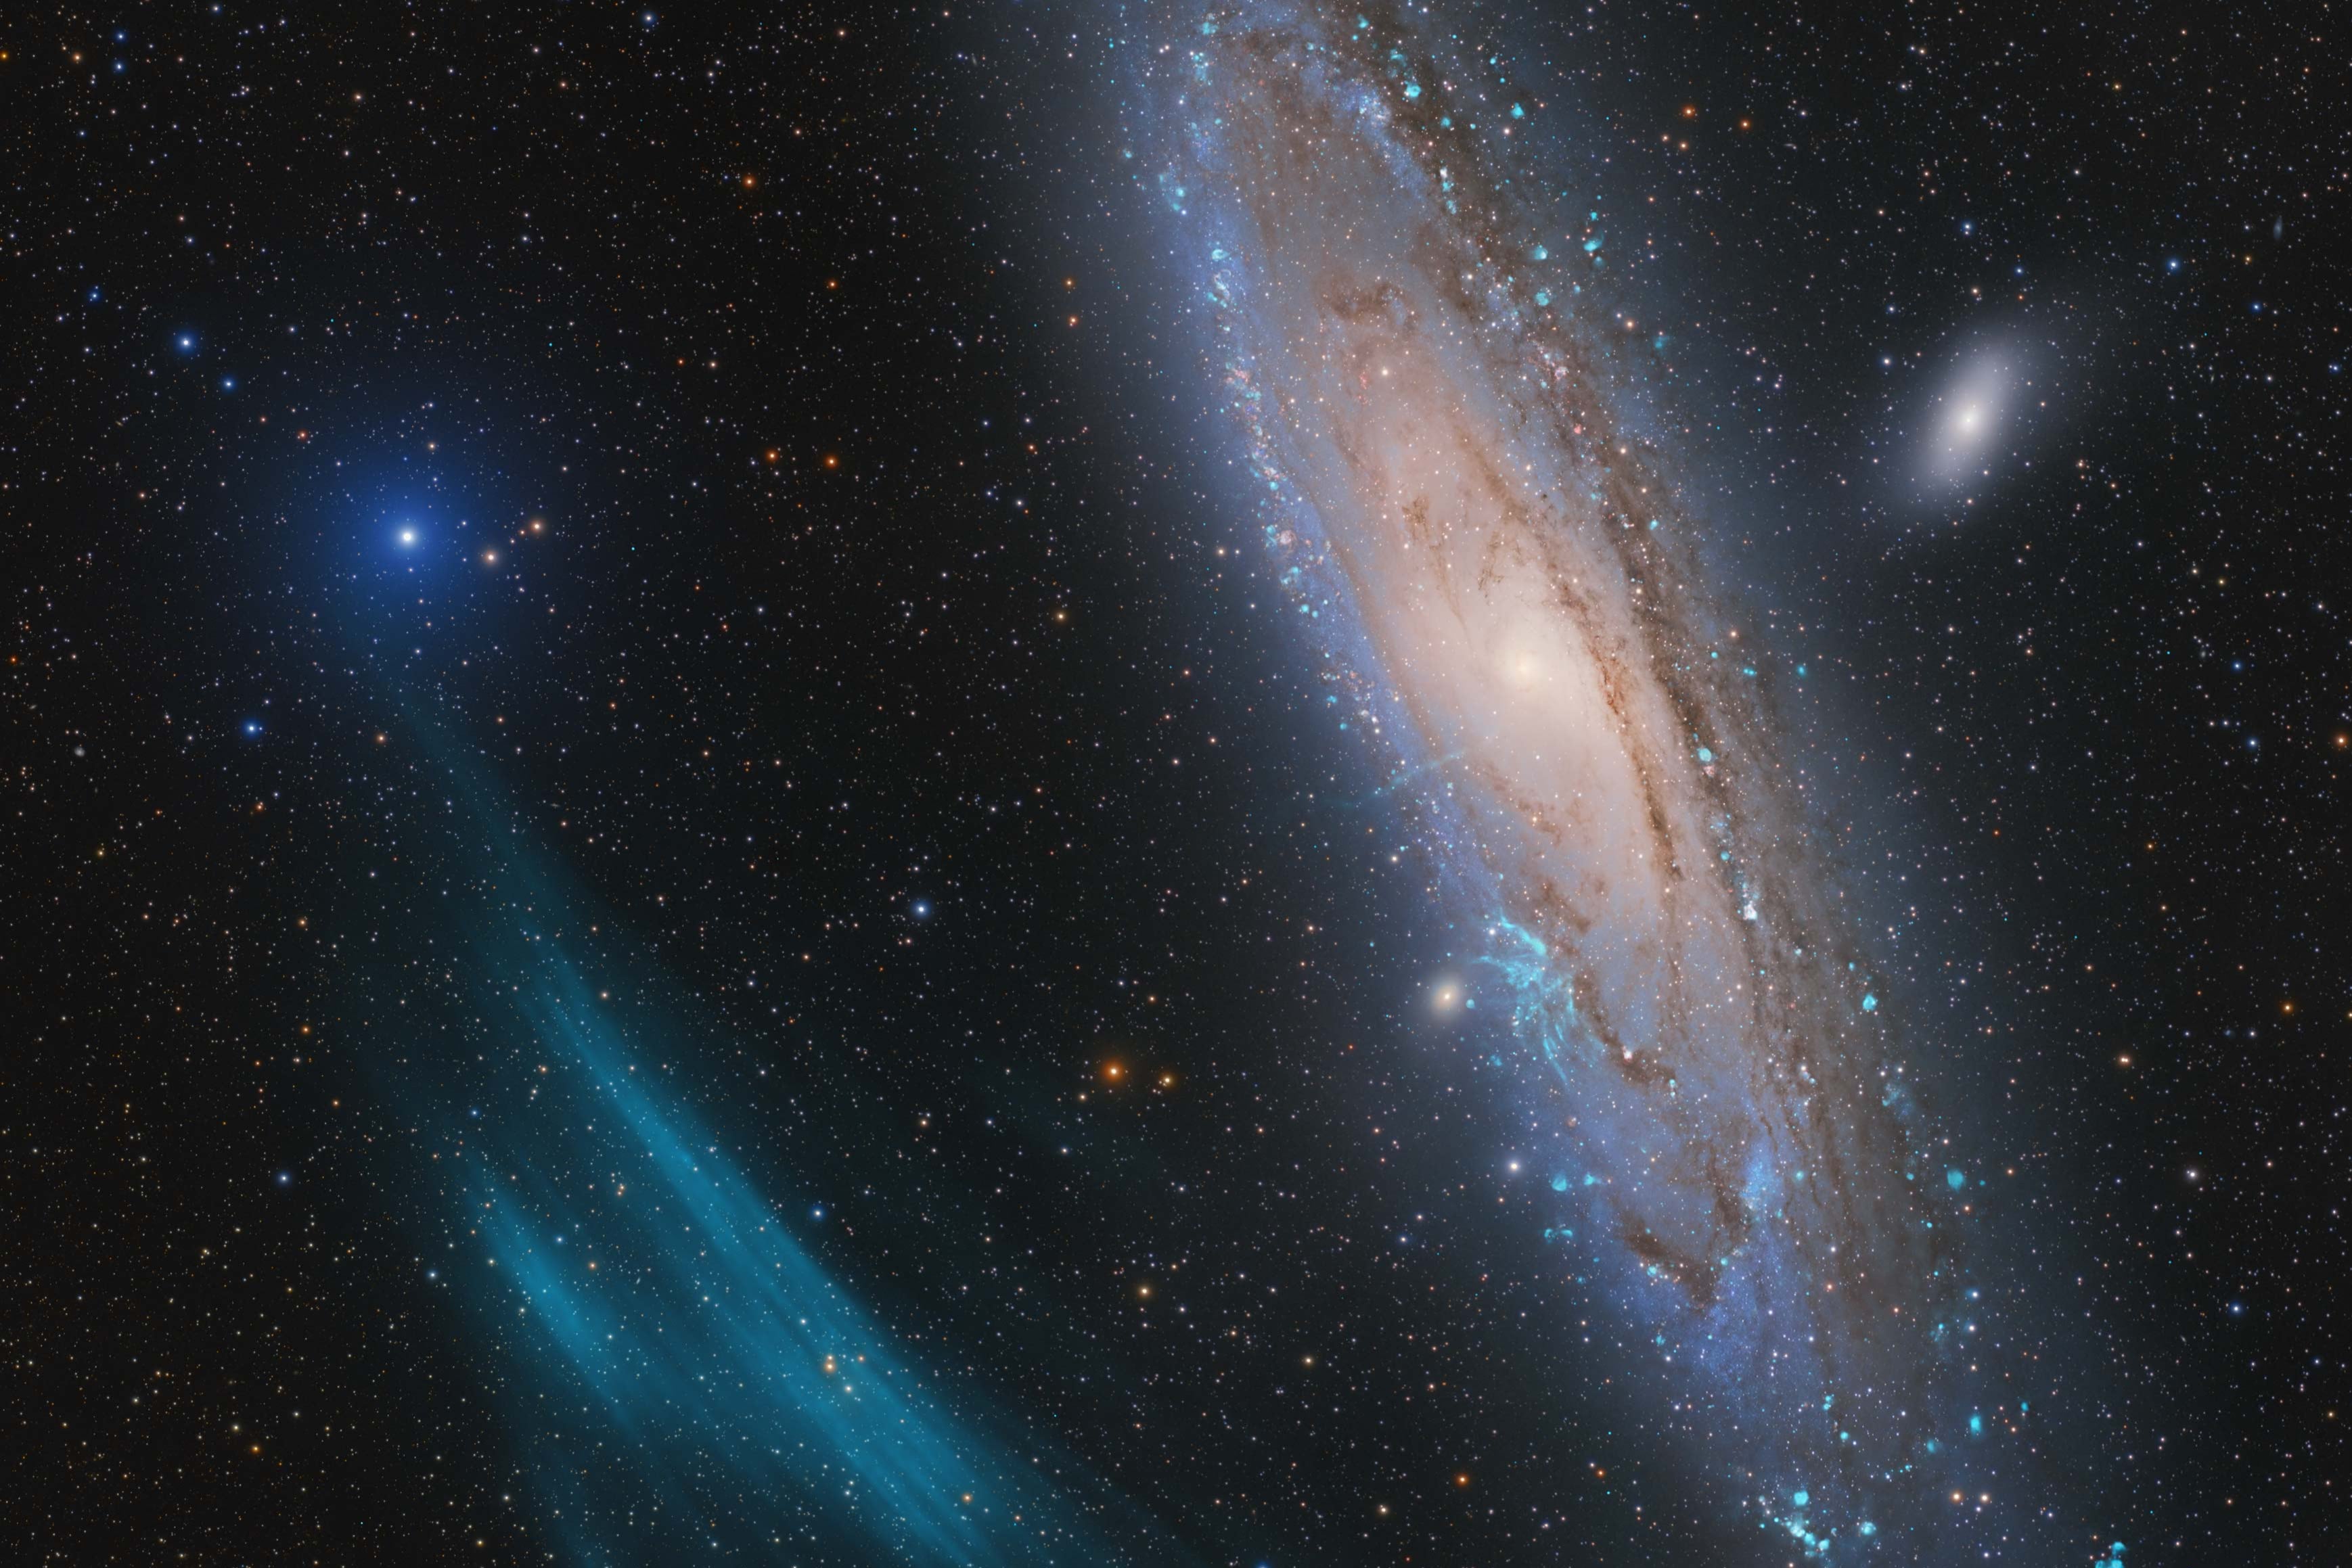 A team of amateur astronomers made a surprising discovery about a ‘plasma arc’ next to the Andromeda galaxy